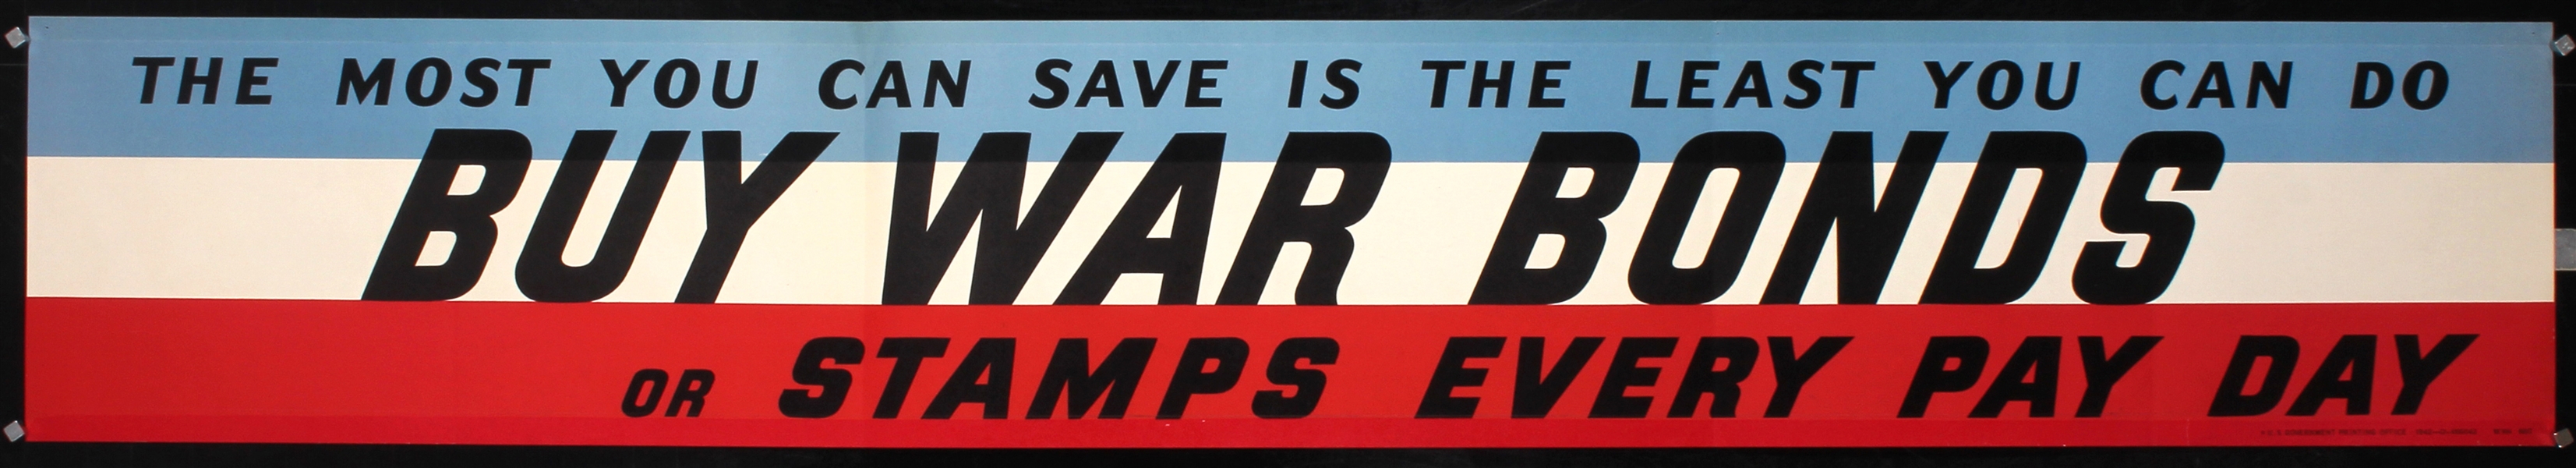 Buy War Bonds (Banner) by Anonymous. 1942